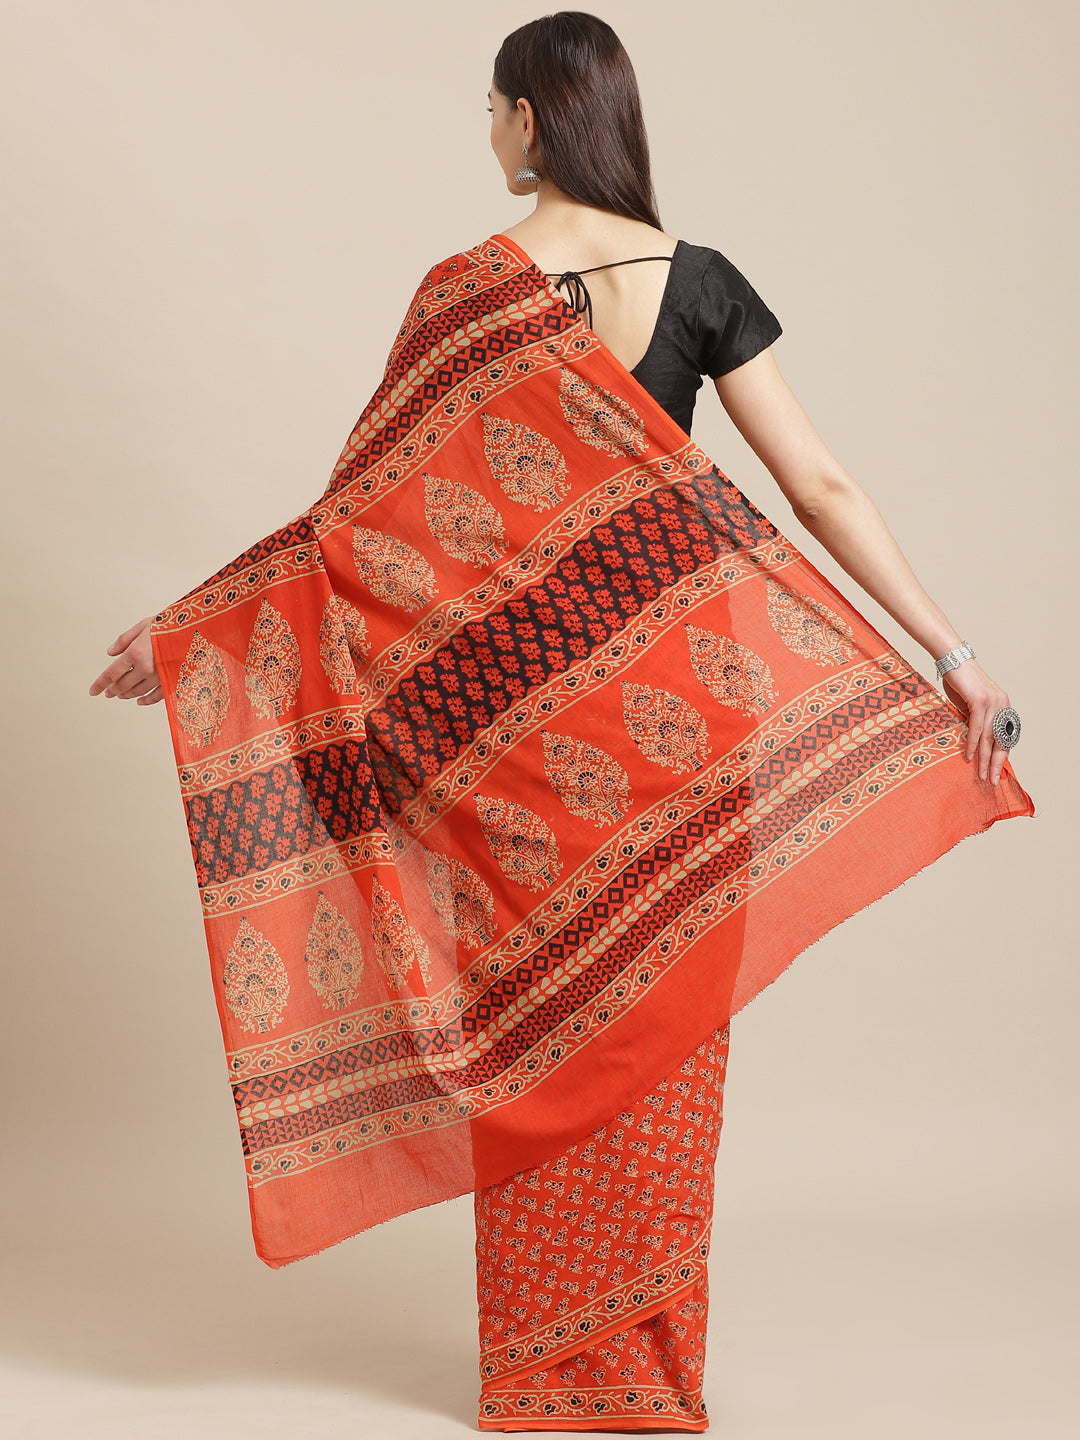 Orange and Black, Kalakari India Cotton Orange Hand crafted saree with blouse BAPASA0103-Saree-Kalakari India-BAPASA0103-Block Print, Cotton, Geographical Indication, Hand Crafted, Heritage Prints, Natural Dyes, Red, Sarees, Sustainable Fabrics, Woven, Yellow-[Linen,Ethnic,wear,Fashionista,Handloom,Handicraft,Indigo,blockprint,block,print,Cotton,Chanderi,Blue, latest,classy,party,bollywood,trendy,summer,style,traditional,formal,elegant,unique,style,hand,block,print, dabu,booti,gift,present,glamo